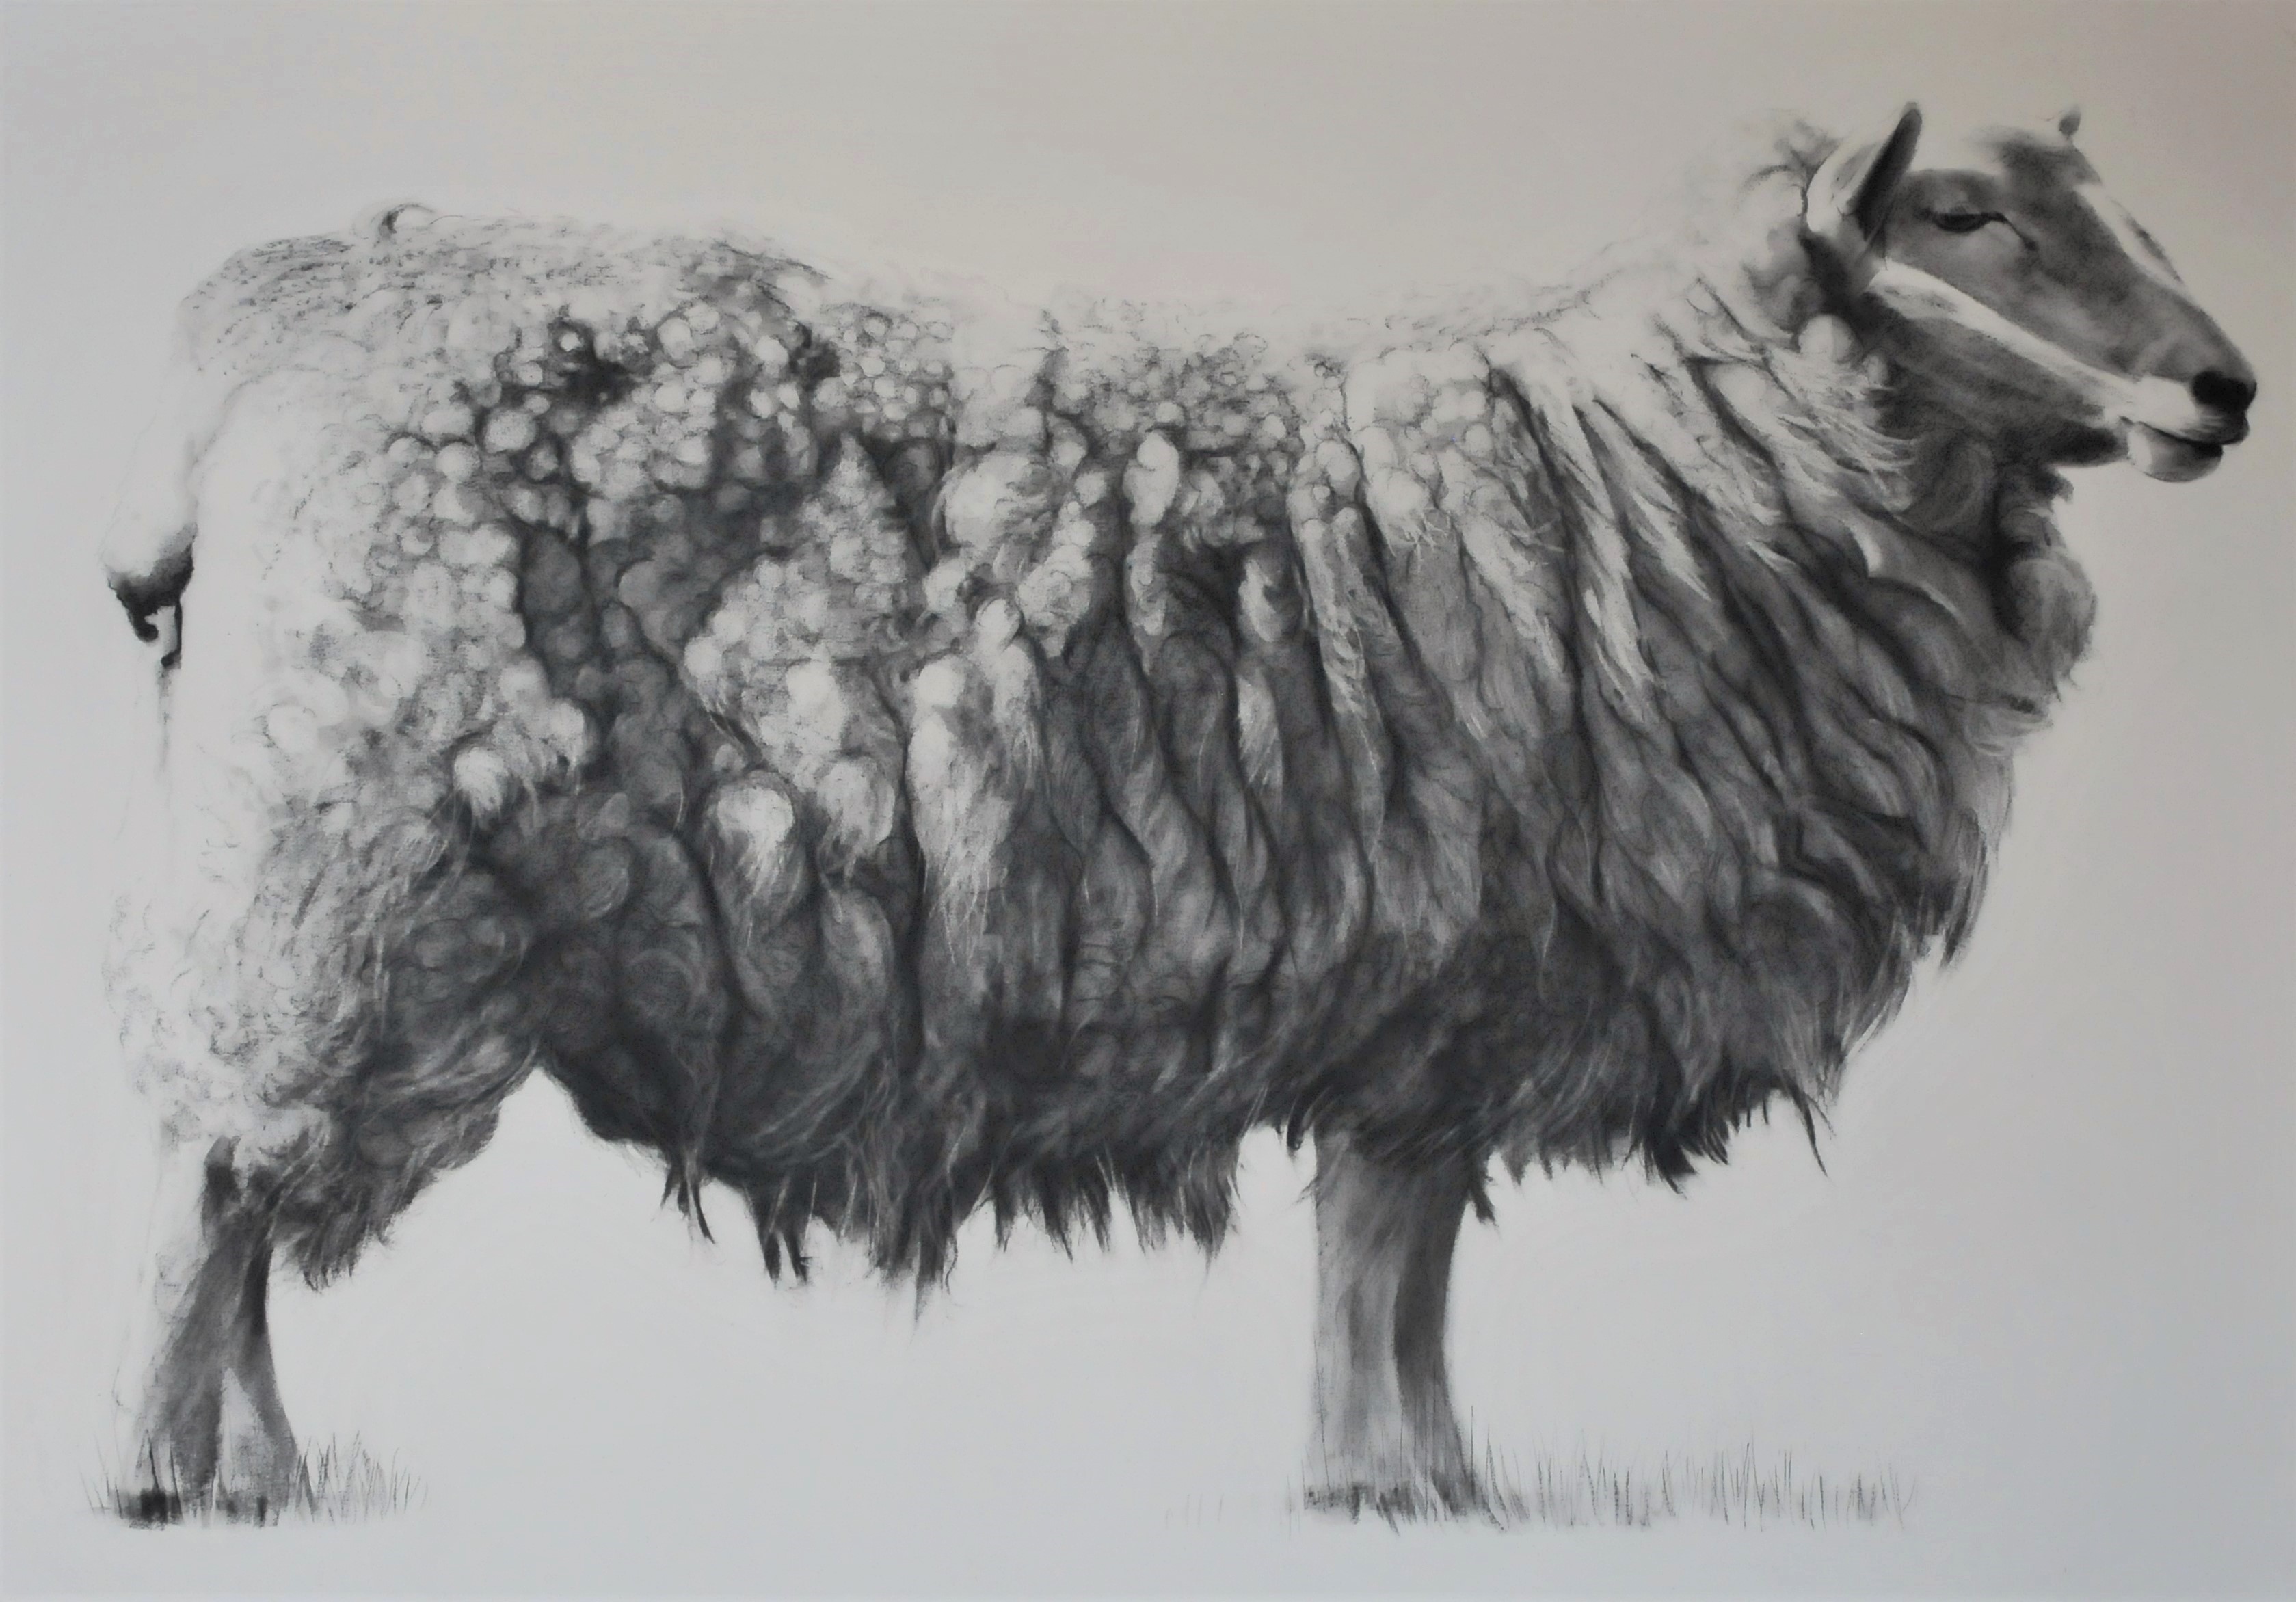 Charcoal drawing of a sheep in landscape format by Will Taylor